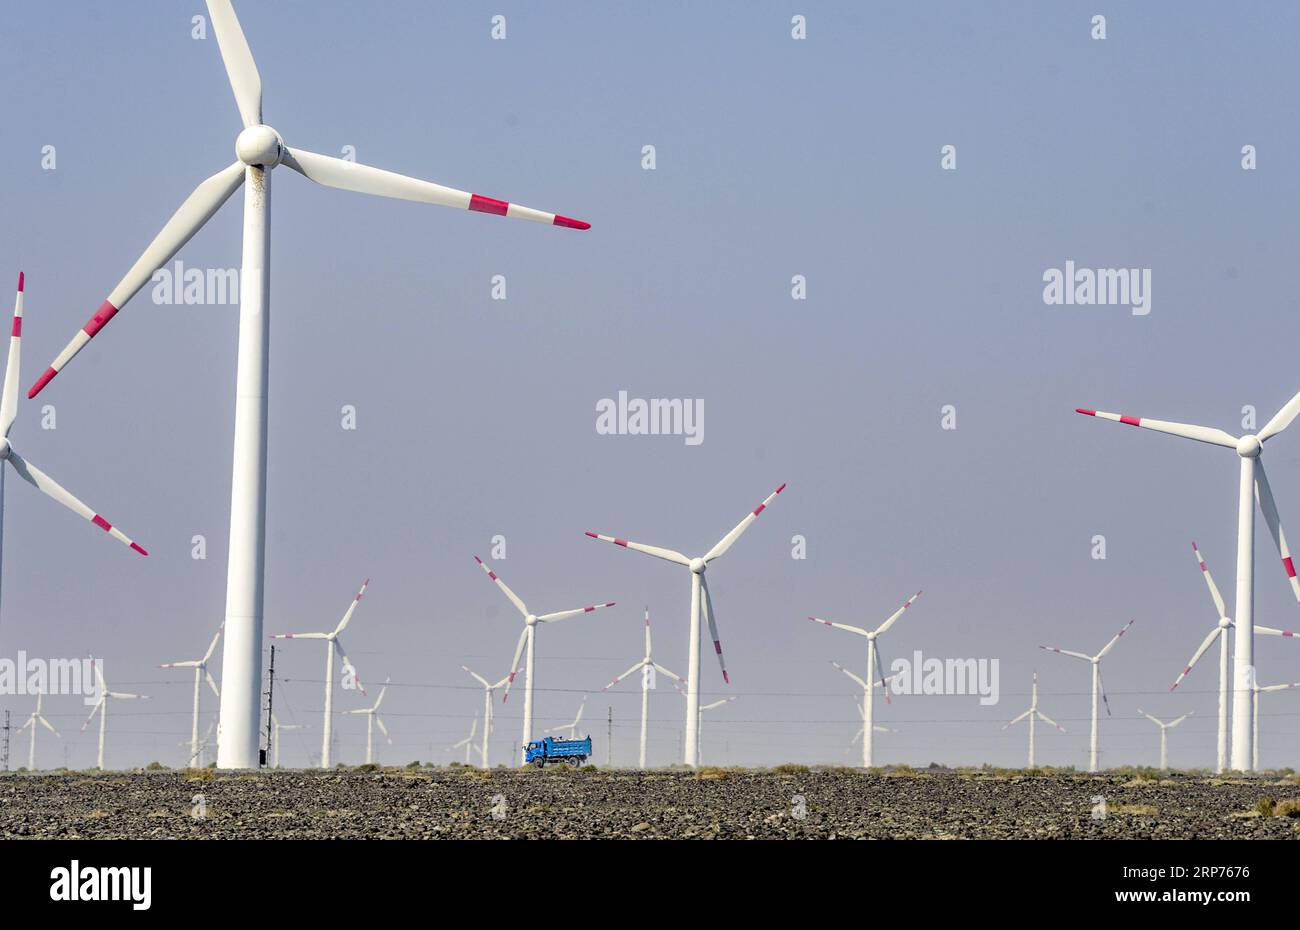 (190129) -- BEIJING, Jan. 29, 2019 (Xinhua) -- A vehicle runs across a wind power plant in Urumqi, northwest China s Xinjiang Uygur Autonomous Region, Sept. 18, 2018. New energy power generation saw double digit growth last year in northwest China s Xinjiang Uygur Autonomous Region amid efforts to reduce coal consumption to improve the energy mix. Wind and solar power generation rose 15.2 percent and 13.6 percent to 36 billion kwh and 11.7 billion kwh respectively, according to the regional development and reform commission. It said 22.9 percent of installed wind power generating capacity and Stock Photo